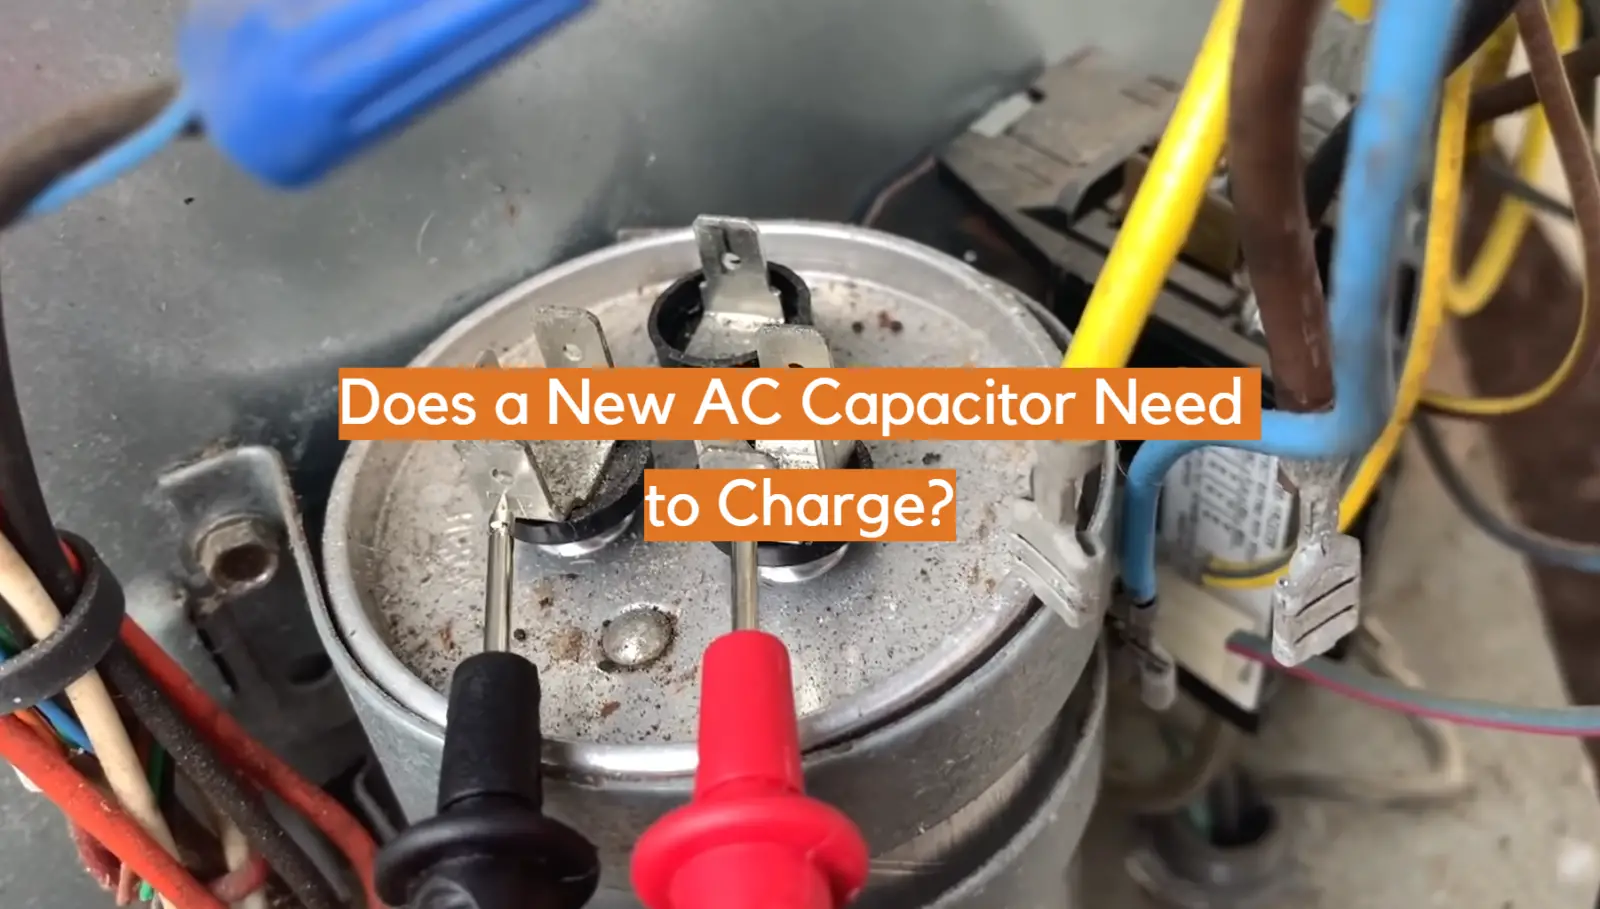 Does a New AC Capacitor Need to Charge?